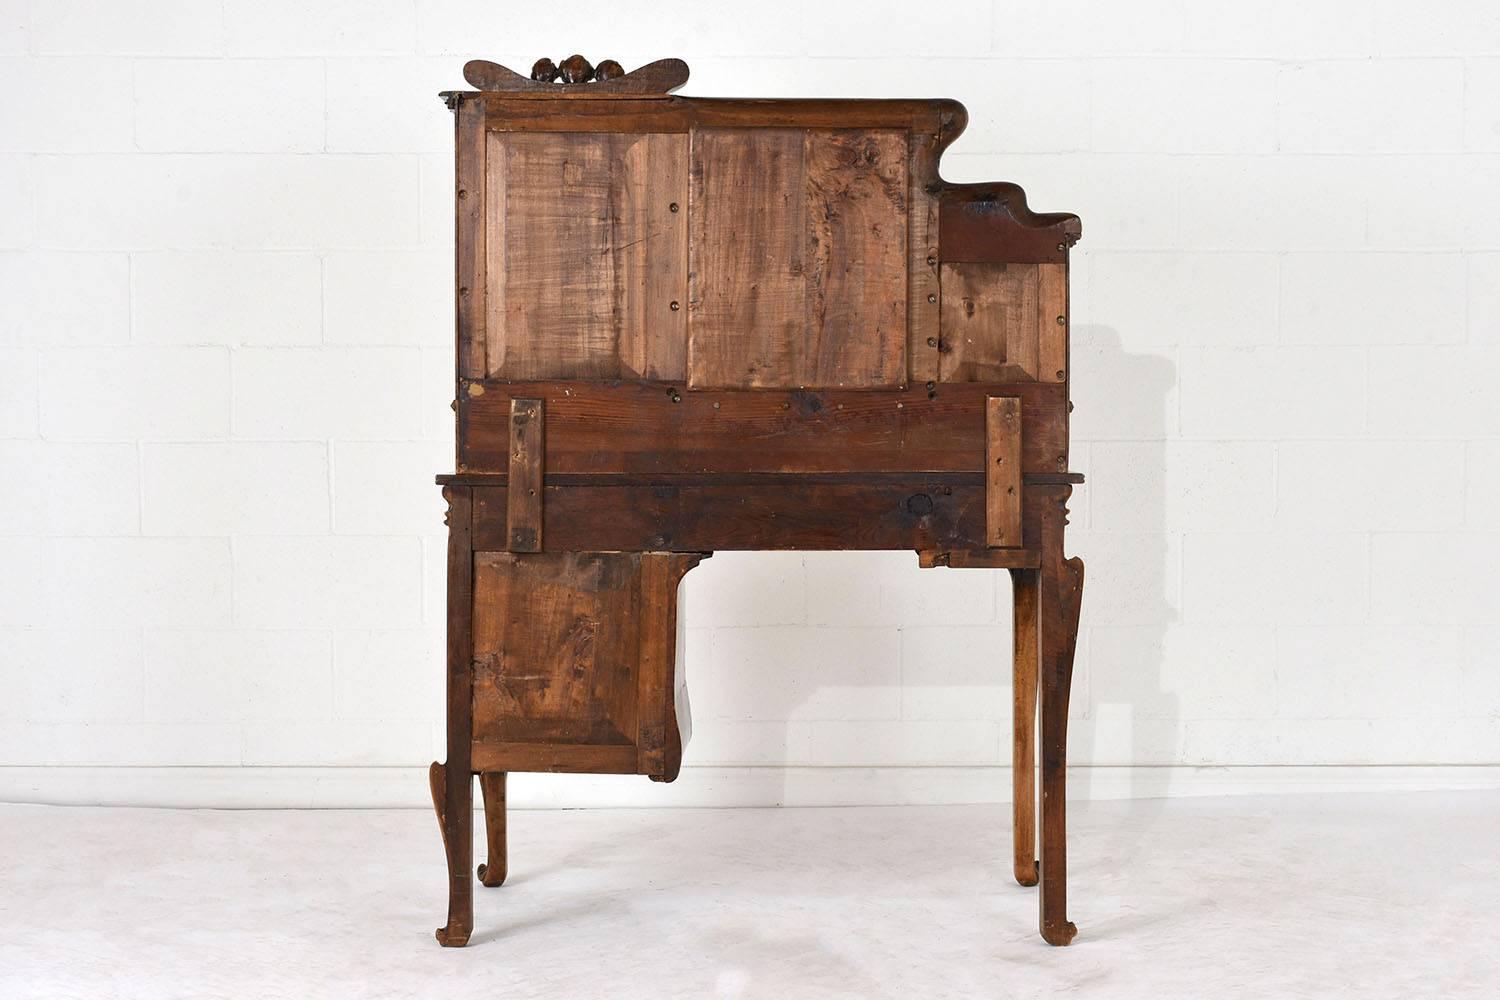 French Early 20th Century Art Nouveau Desk in the Manner of Louis Majorelle